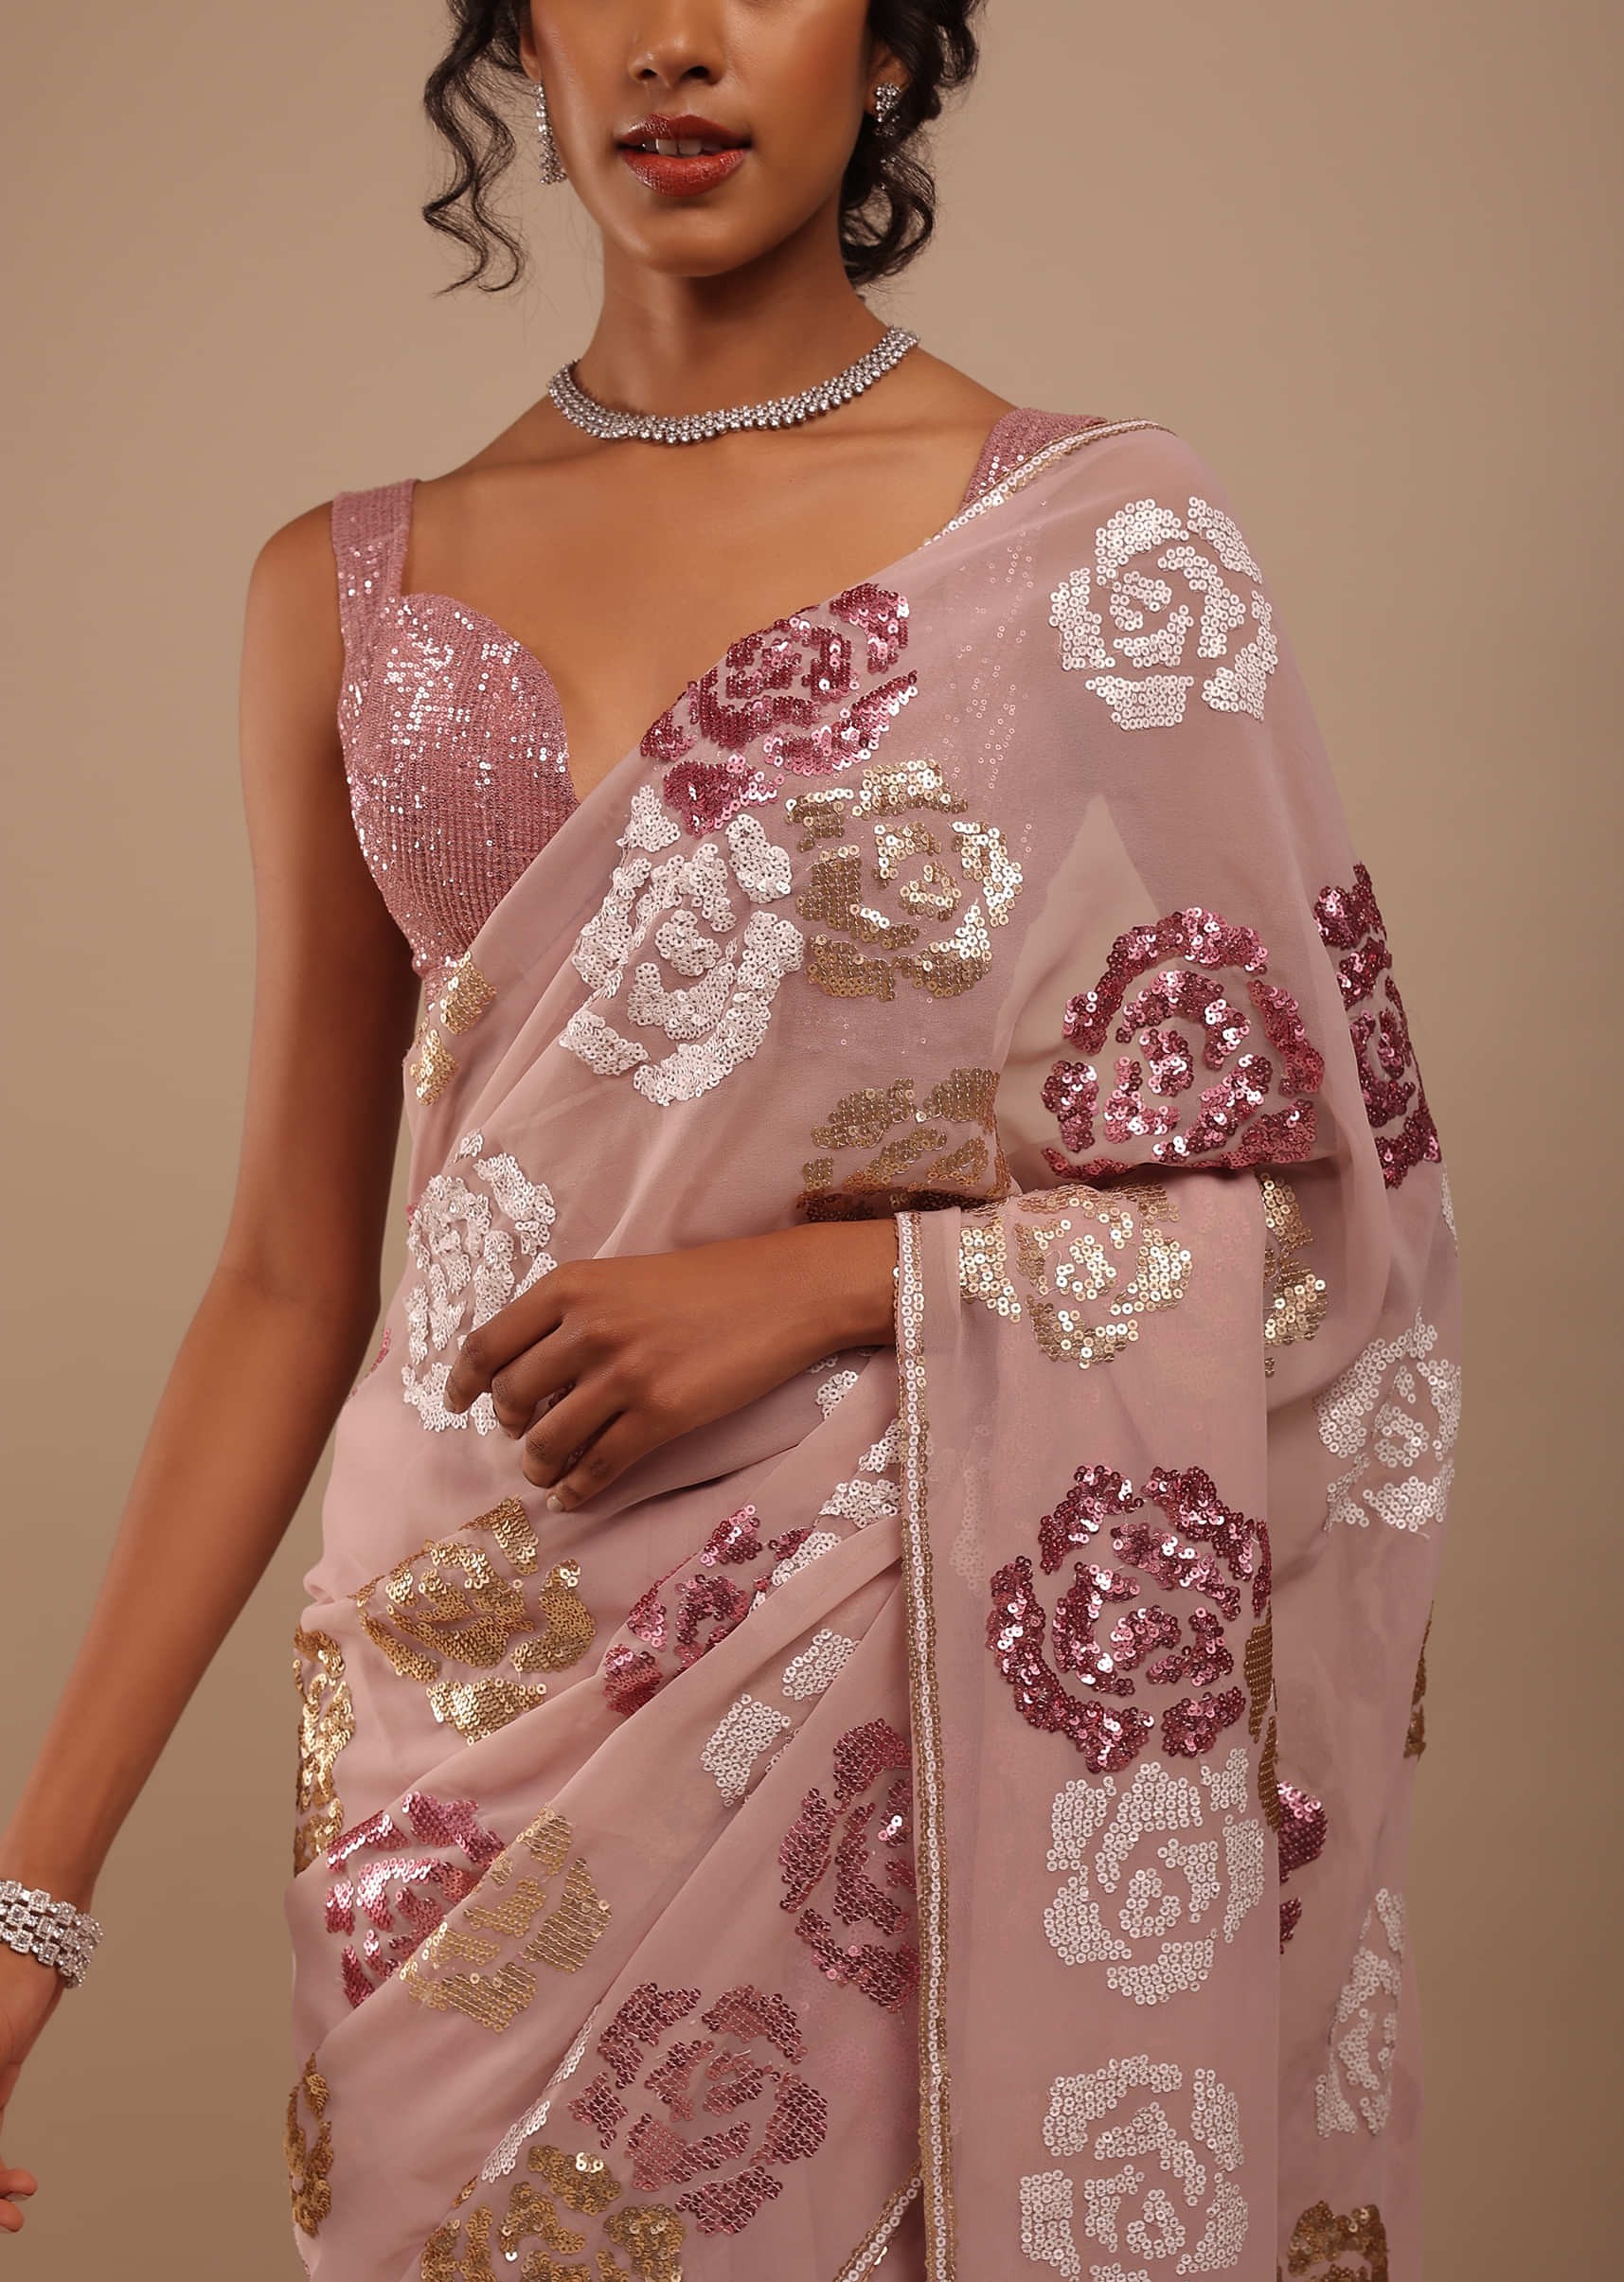 Hushed Lilac Multi-Color Sequins Saree In Floral Motifs Embroidery, Crafted In Chiffon With White And Gold Sequins On The Pallu Border